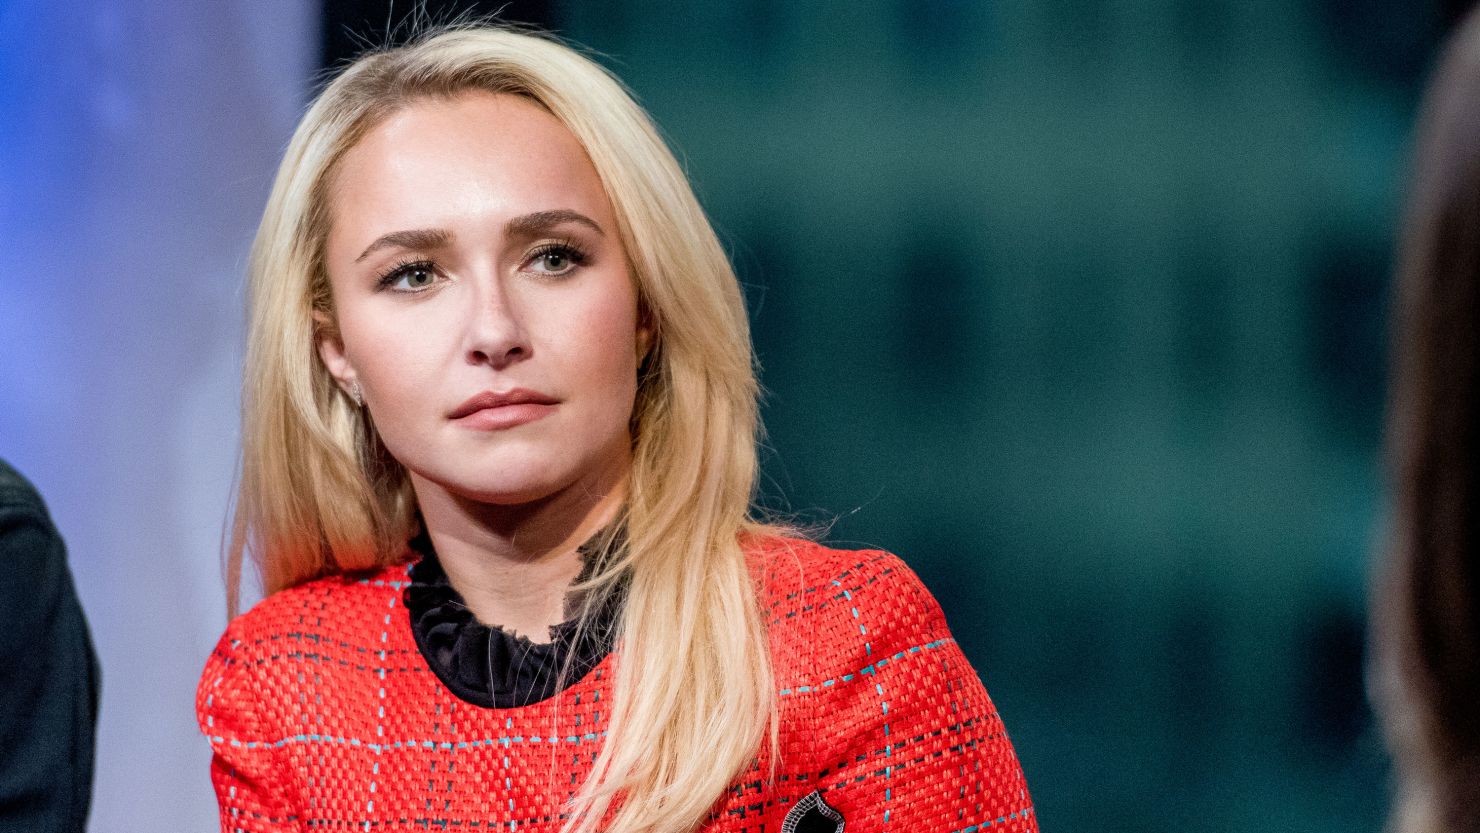 Hayden Panettiere, seen here discussing "Nashville" with the Build Series at AOL HQ on January 5, 2017 in New York City, has opened up about her battle with addiction. 